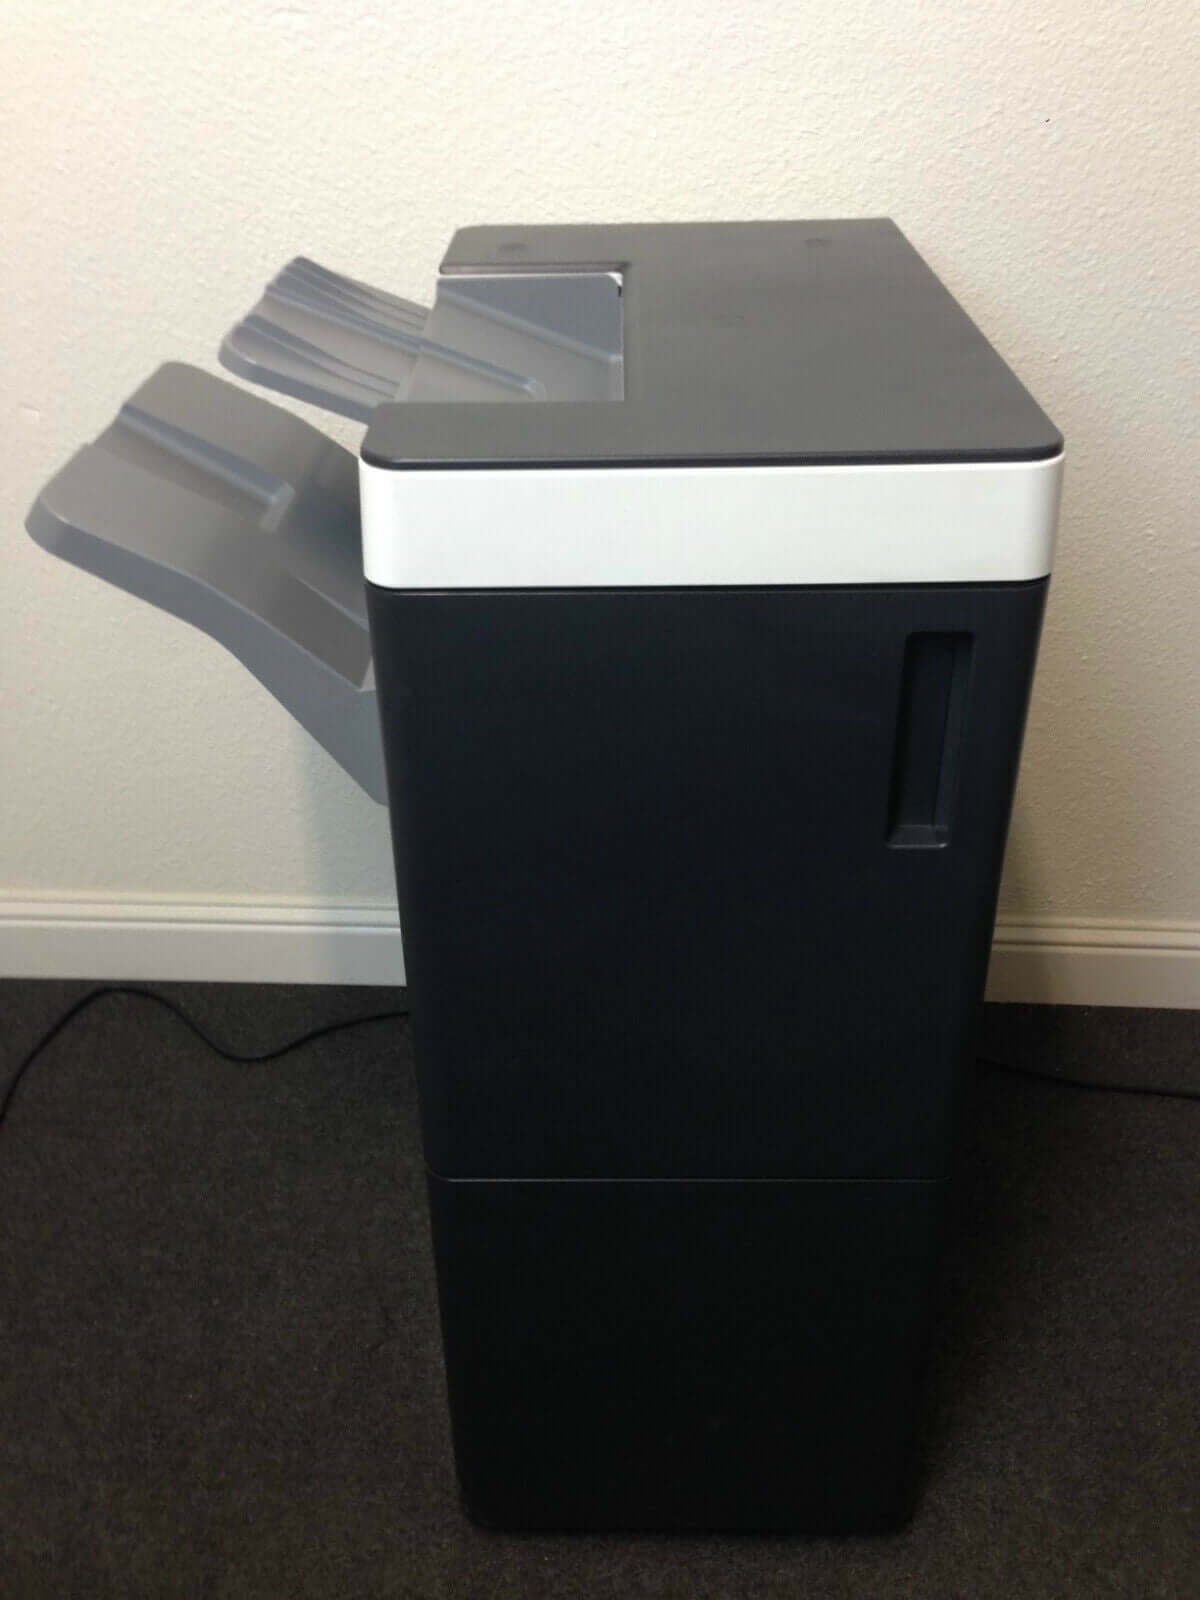 Konica Minolta Bizhub FS-517 Finisher fully tested with staple and collate FS517 - copier-clearance-center